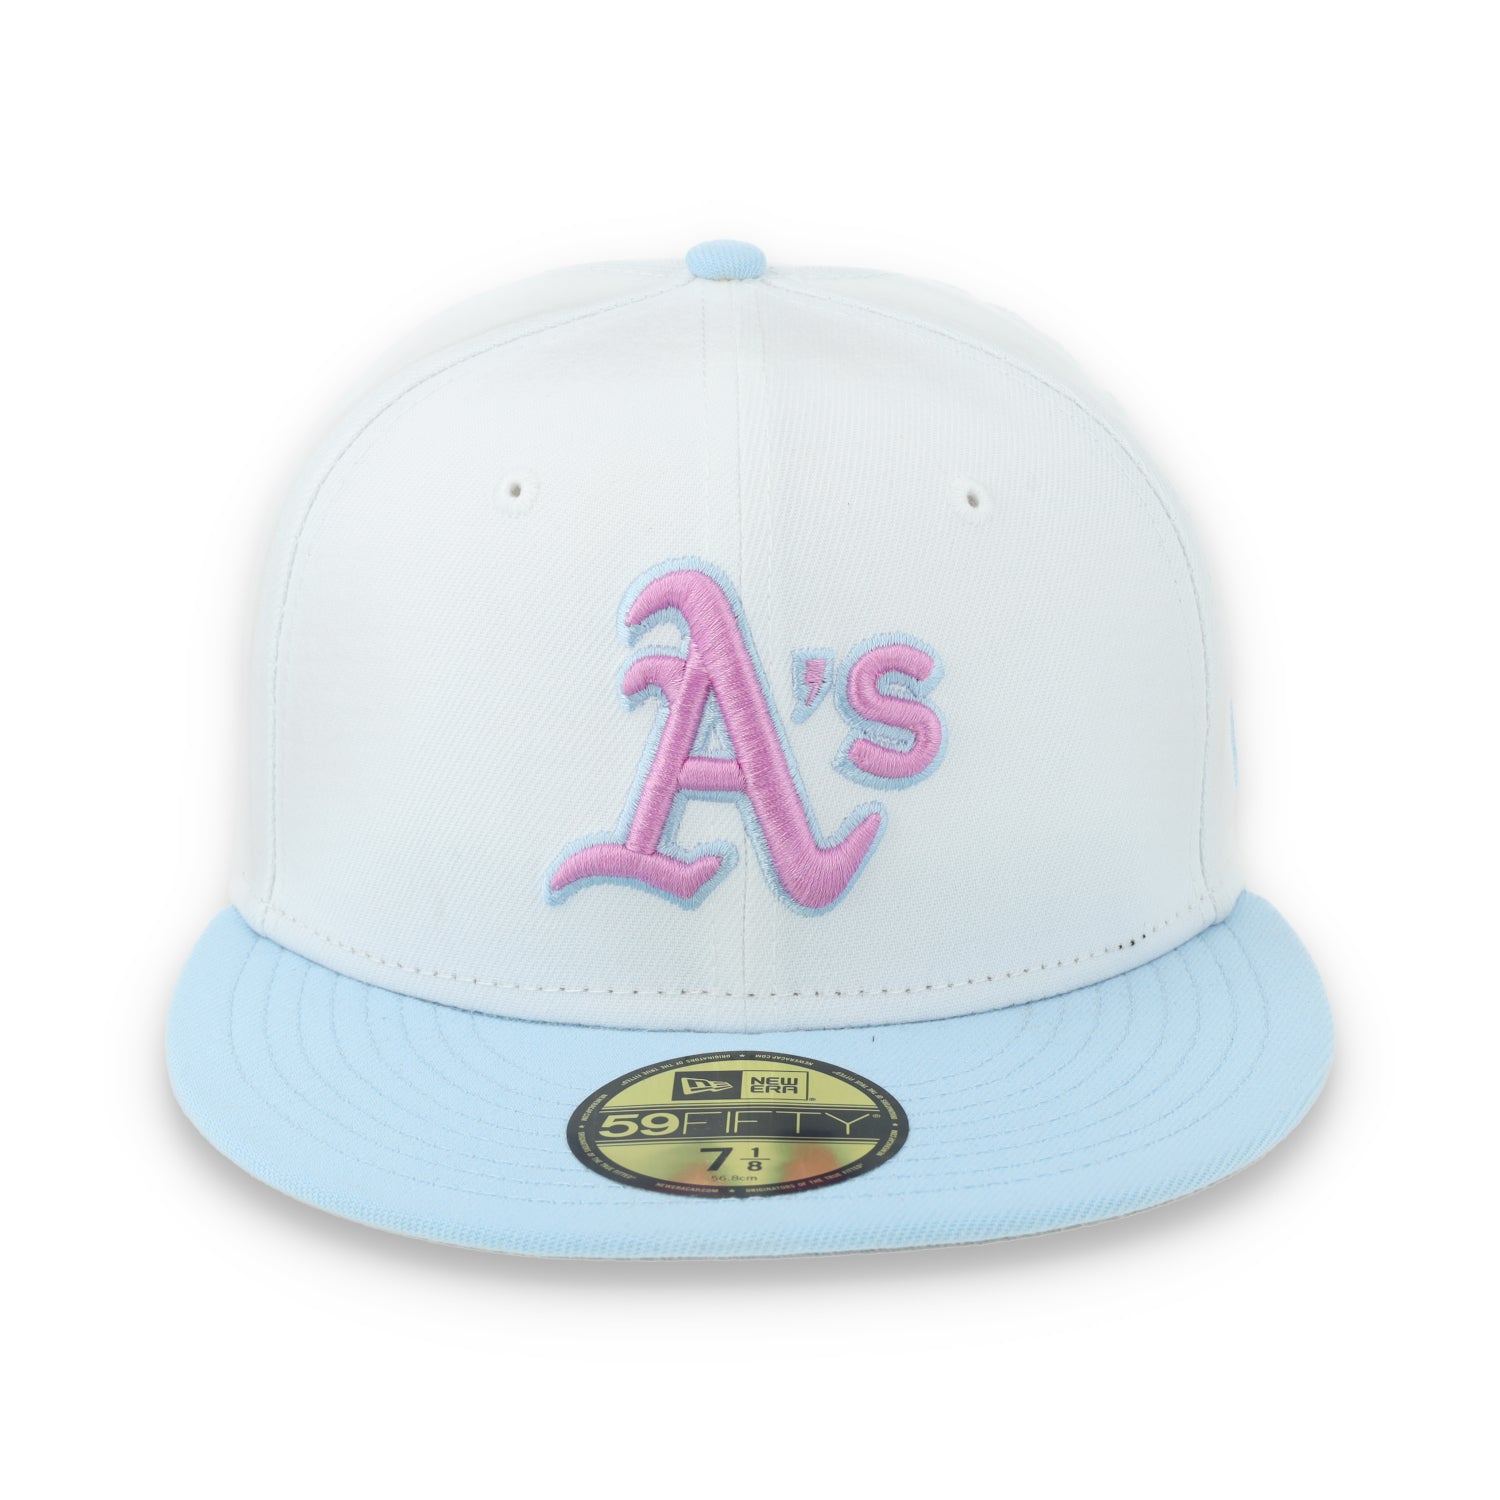 New Era Oakland Athletics Color Pack 59FIFTY Fitted Hat-White/Light Blue /Pink